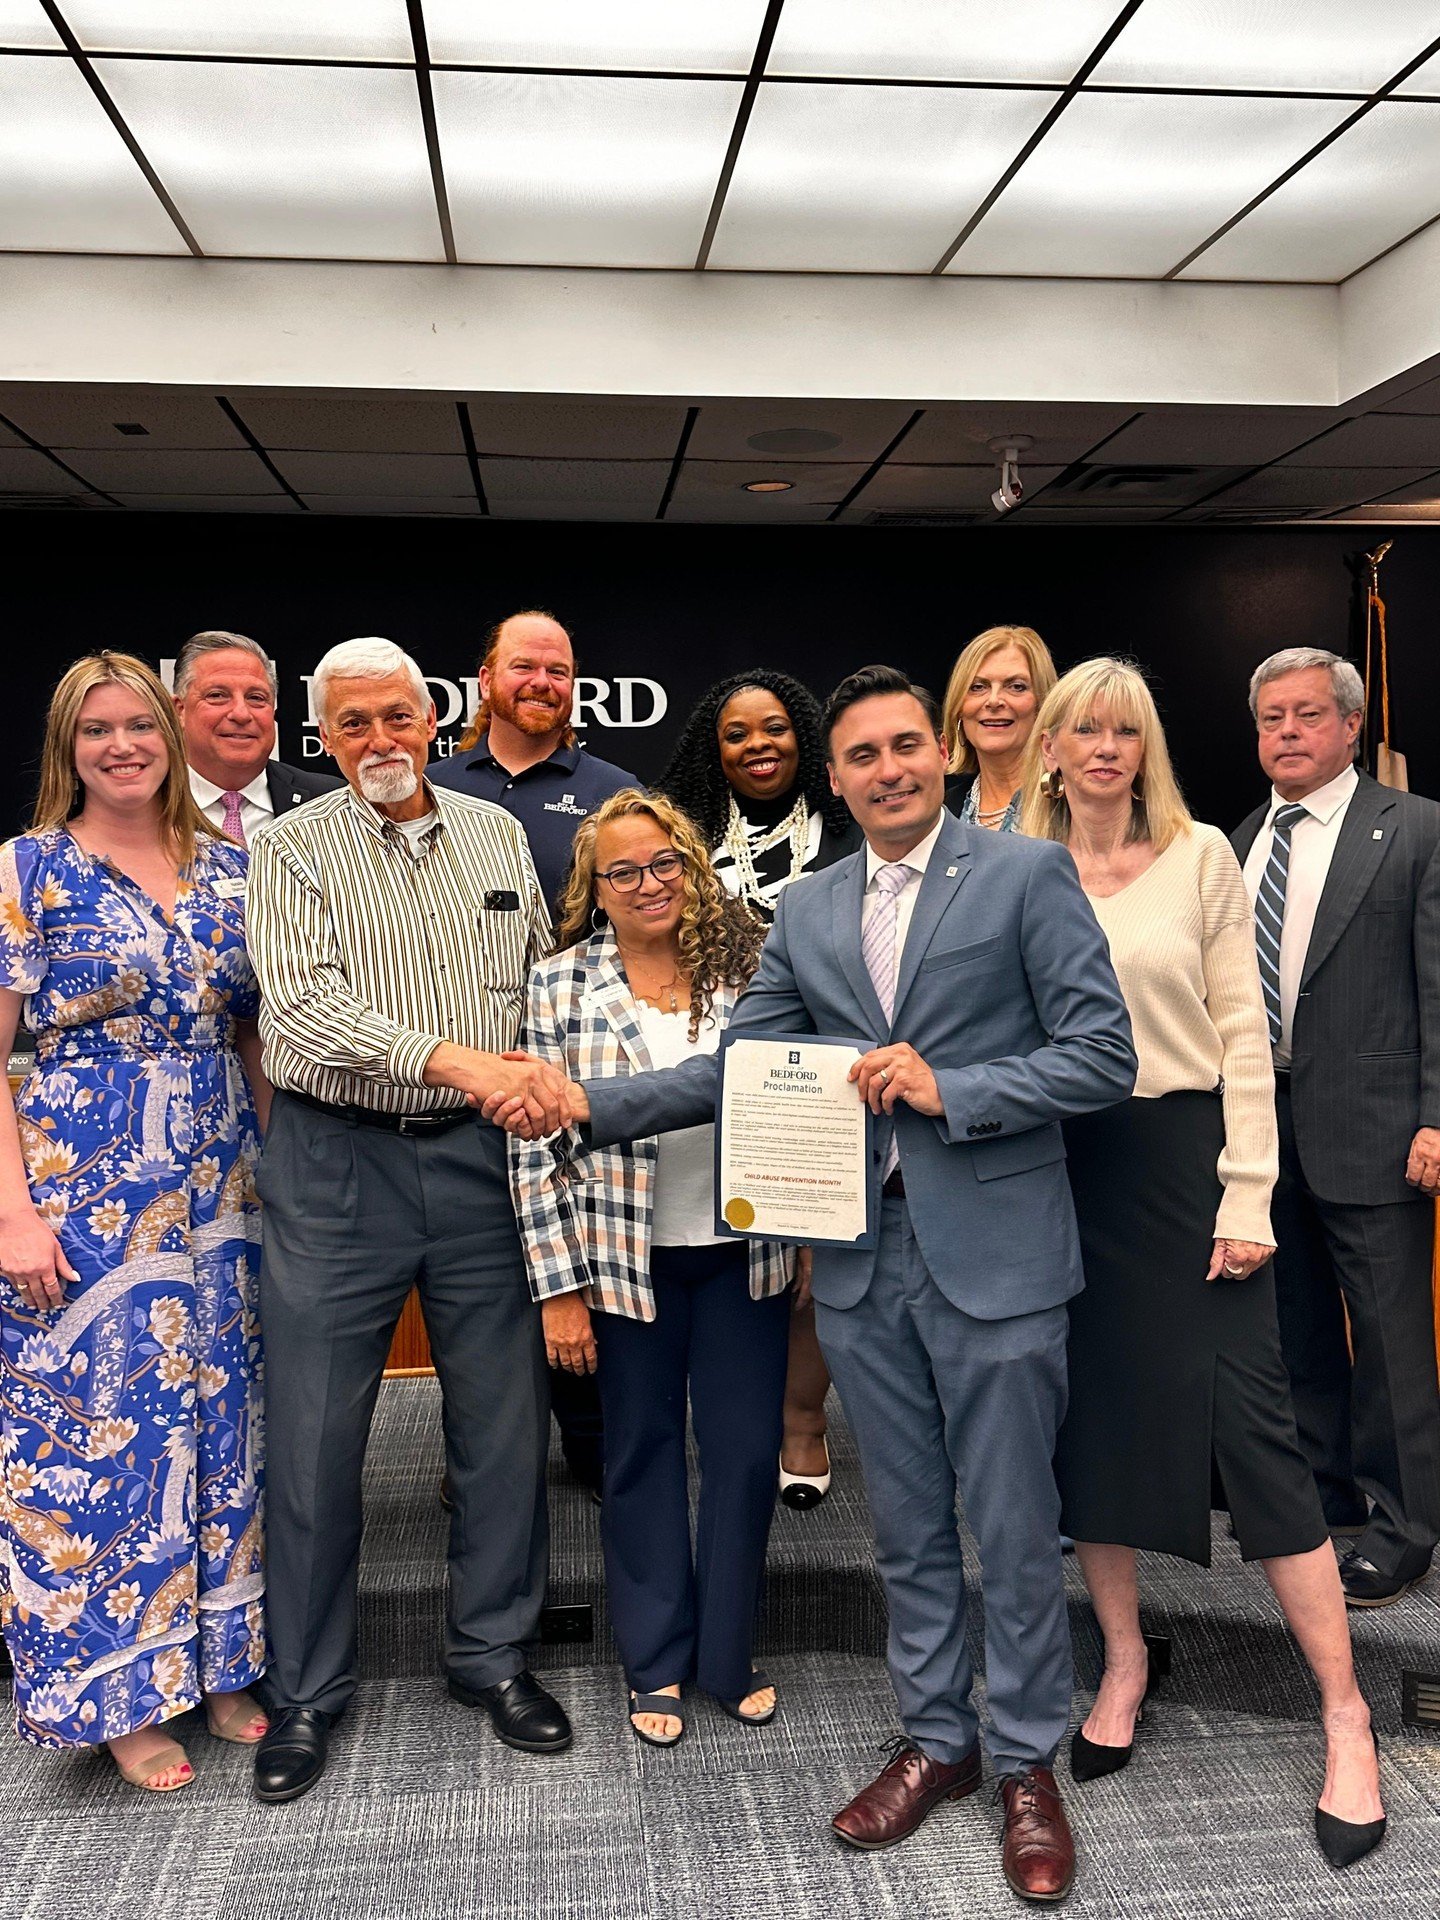 Thank you to the @cityofbedfordtx for issuing a Child Abuse Prevention Month proclamation last week and recognizing CASA of Tarrant County's efforts in speaking up for abused and neglected children in Bedford! #capm #bedfordtx